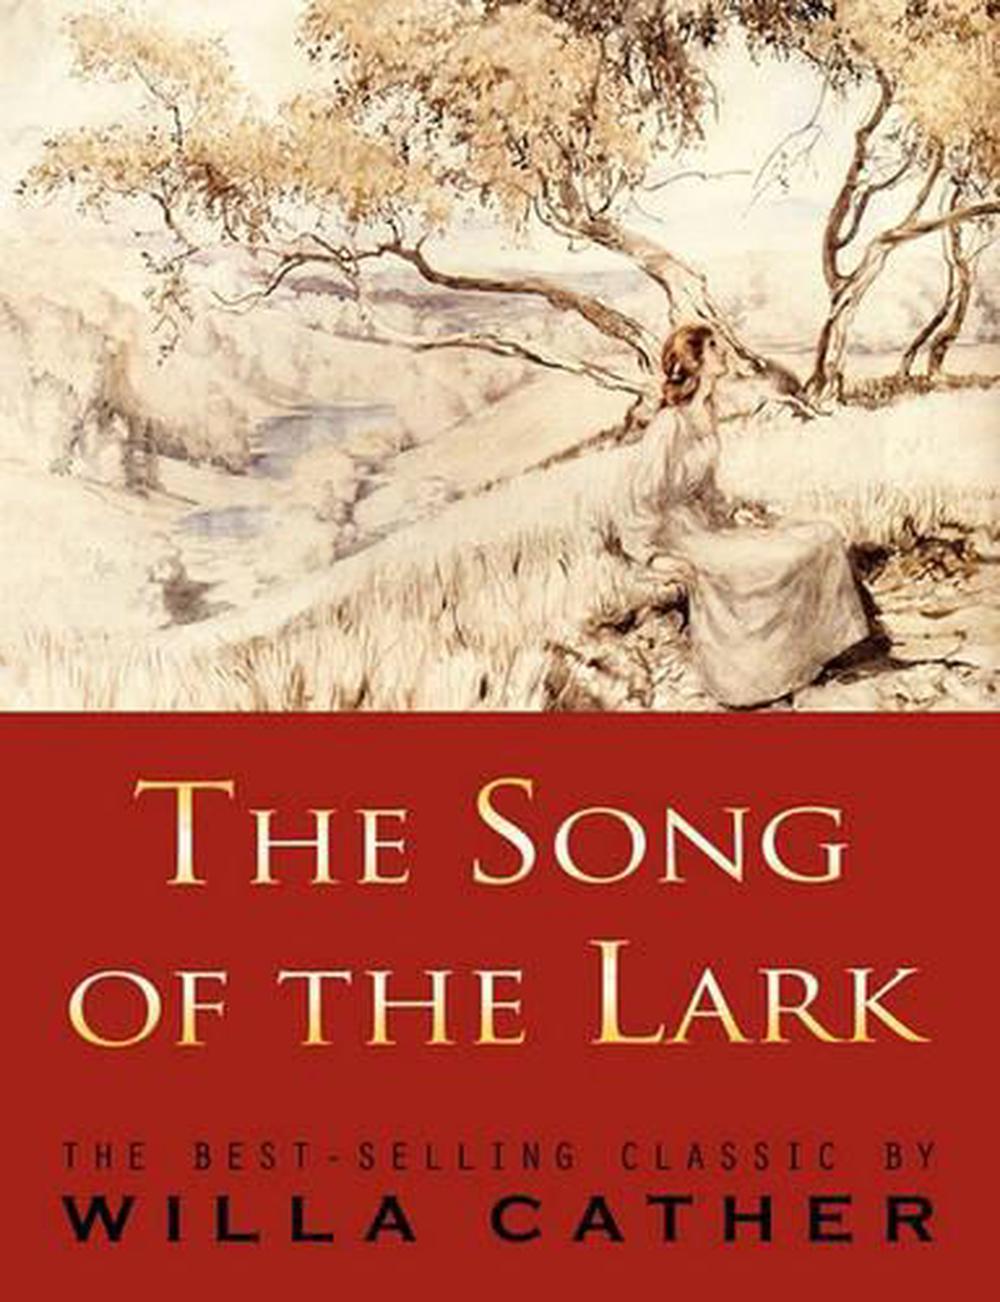 willa cather novel the song of the